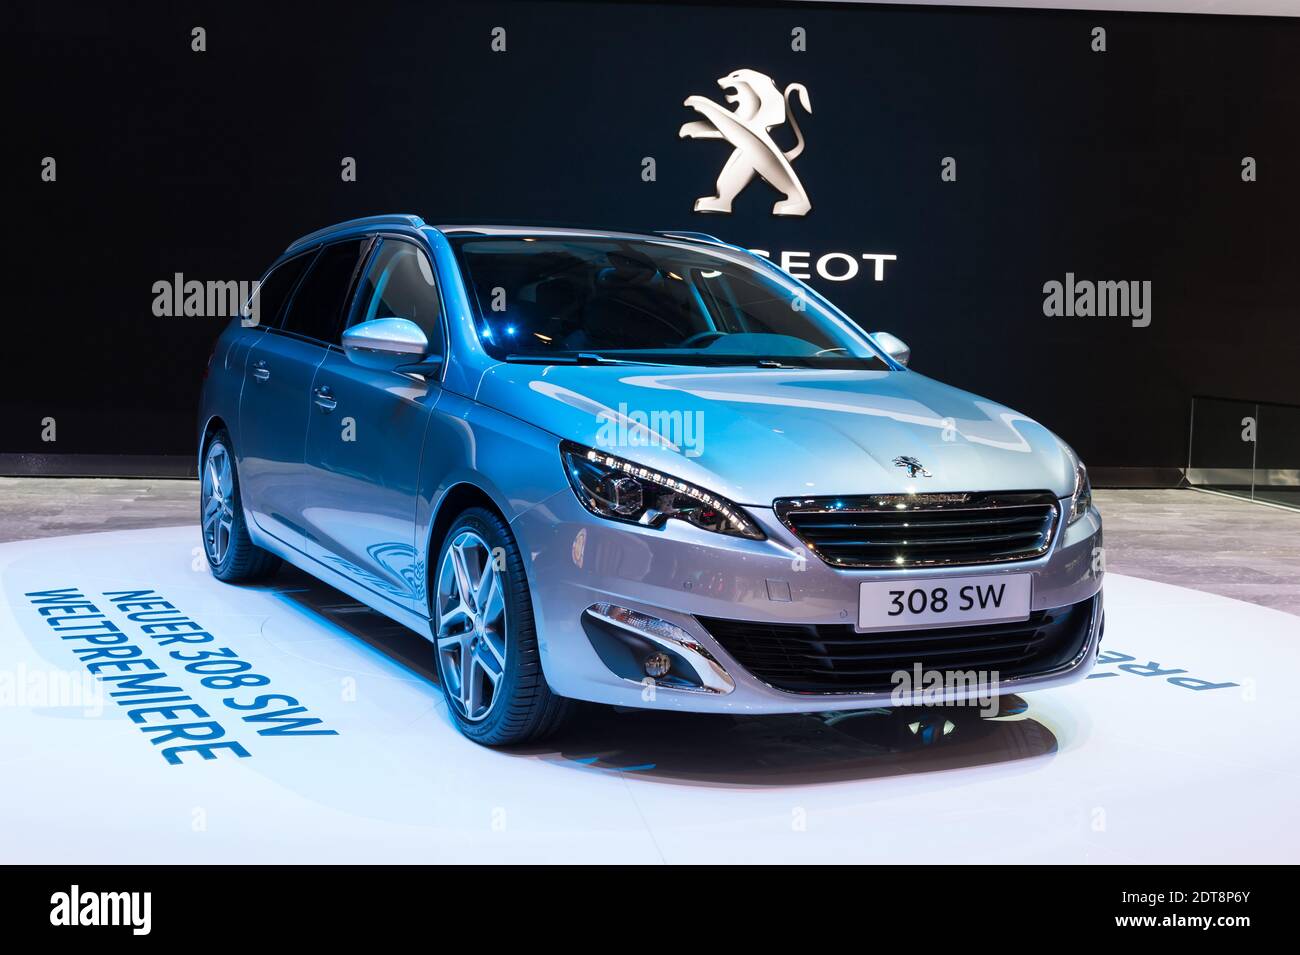 Peugeot 308 SW World Premiere during the 83rd International Geneva Motor  Show, in Geneva, Switzerland on March 4, 2014. Photo by  Loona/ABACAPRESS.COM during the 83rd International Geneva Motor Show, in  Geneva, Switzerland